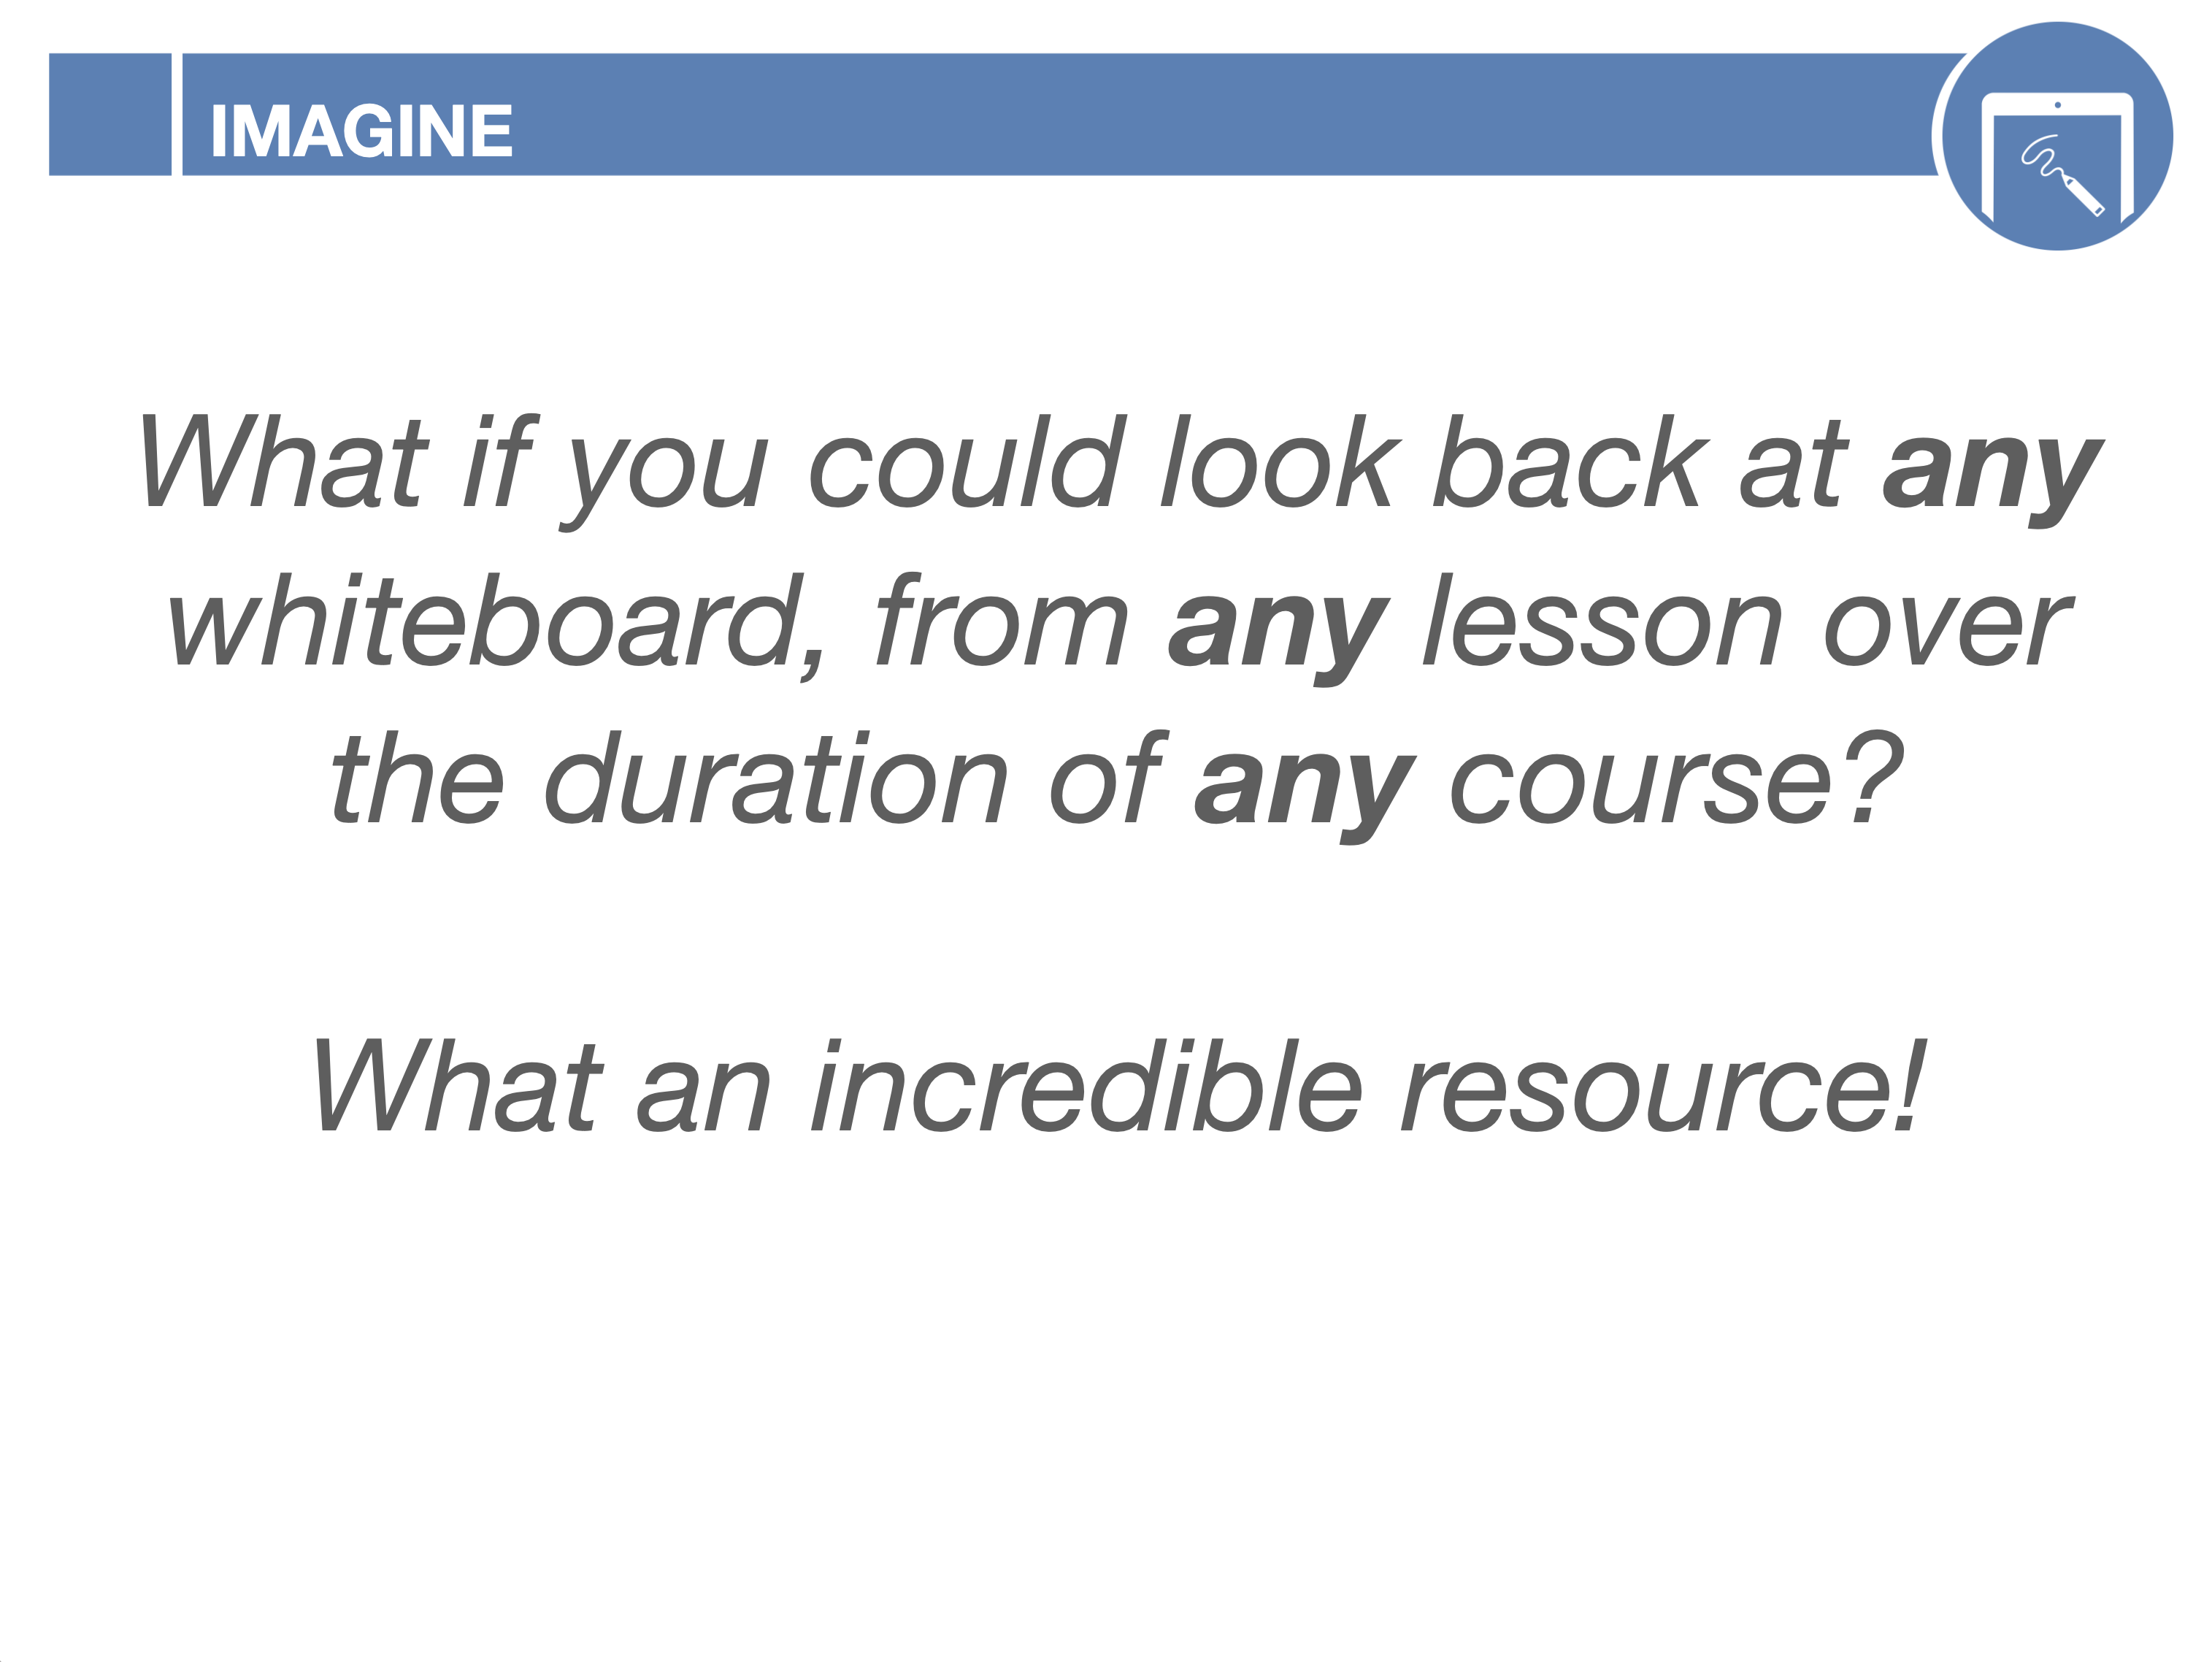 Book extract that reads "What if you could look back at any whiteboard, from any lesson?"